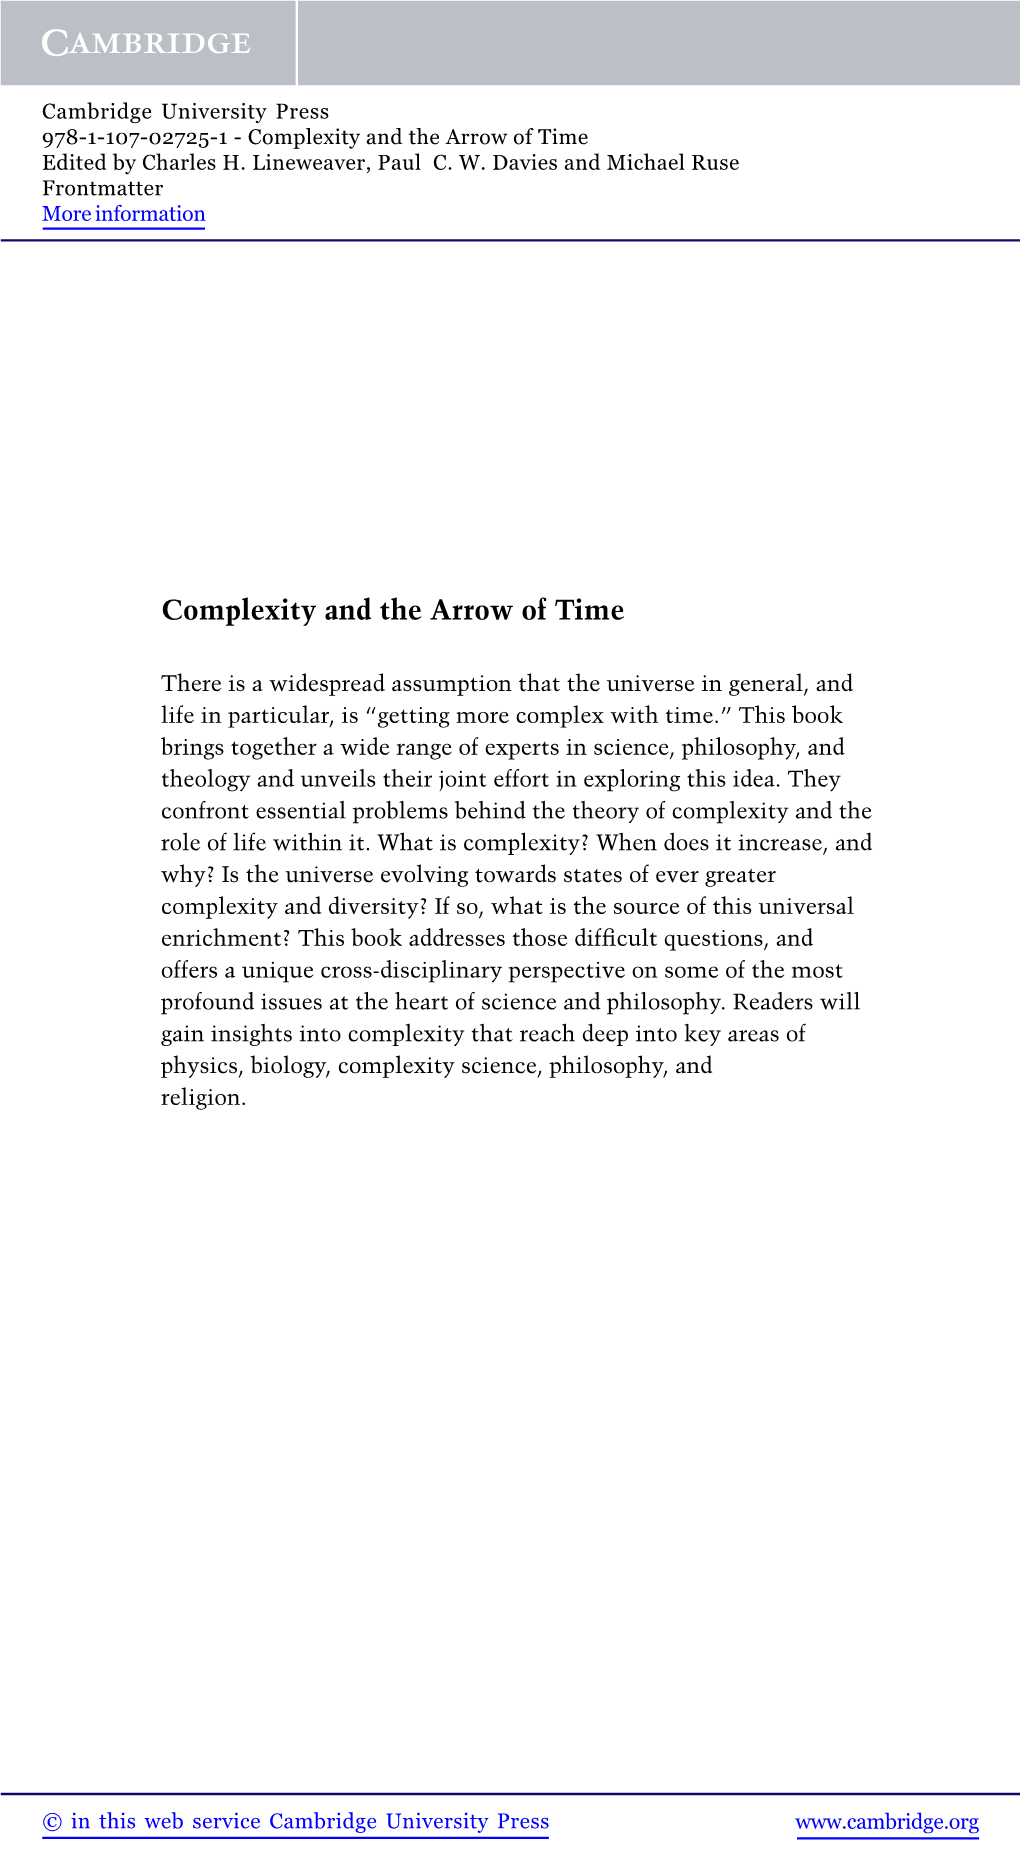 Complexity and the Arrow of Time Edited by Charles H